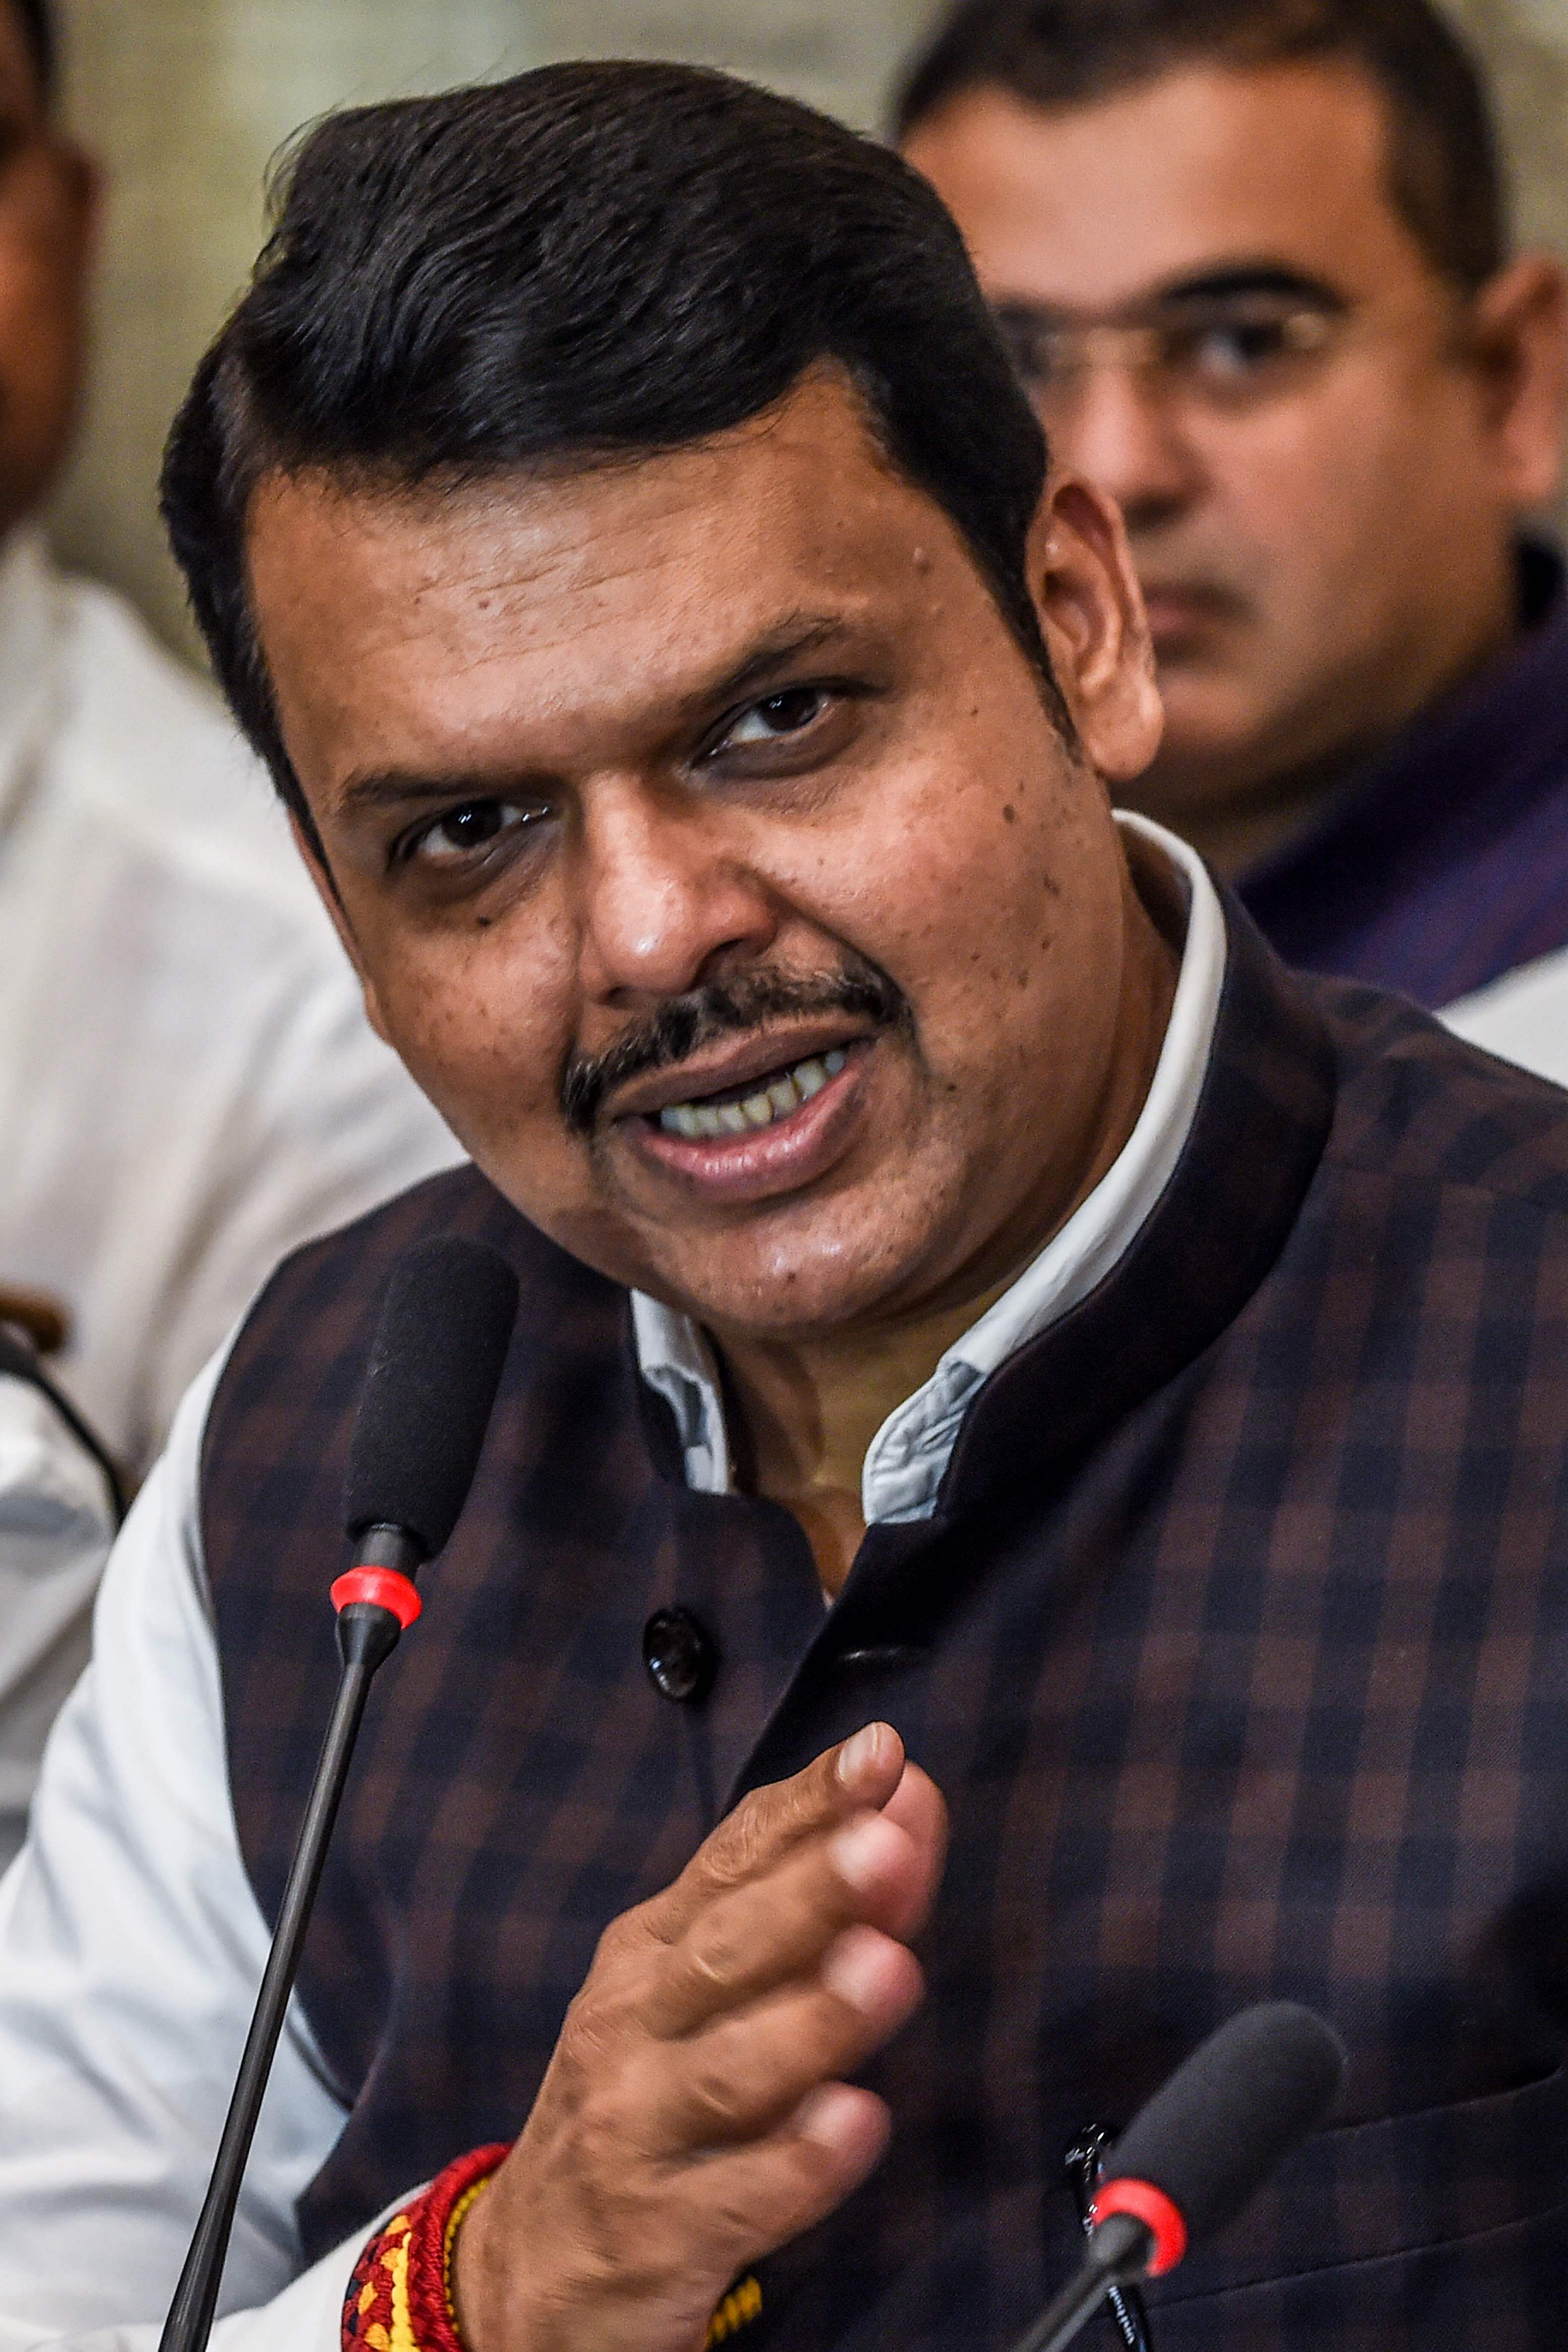 Bharatiya Janata Party (BJP) leader and Chief Minister of the western Indian state of Maharashtra Devendra Fadnavis. (AFP Photo)